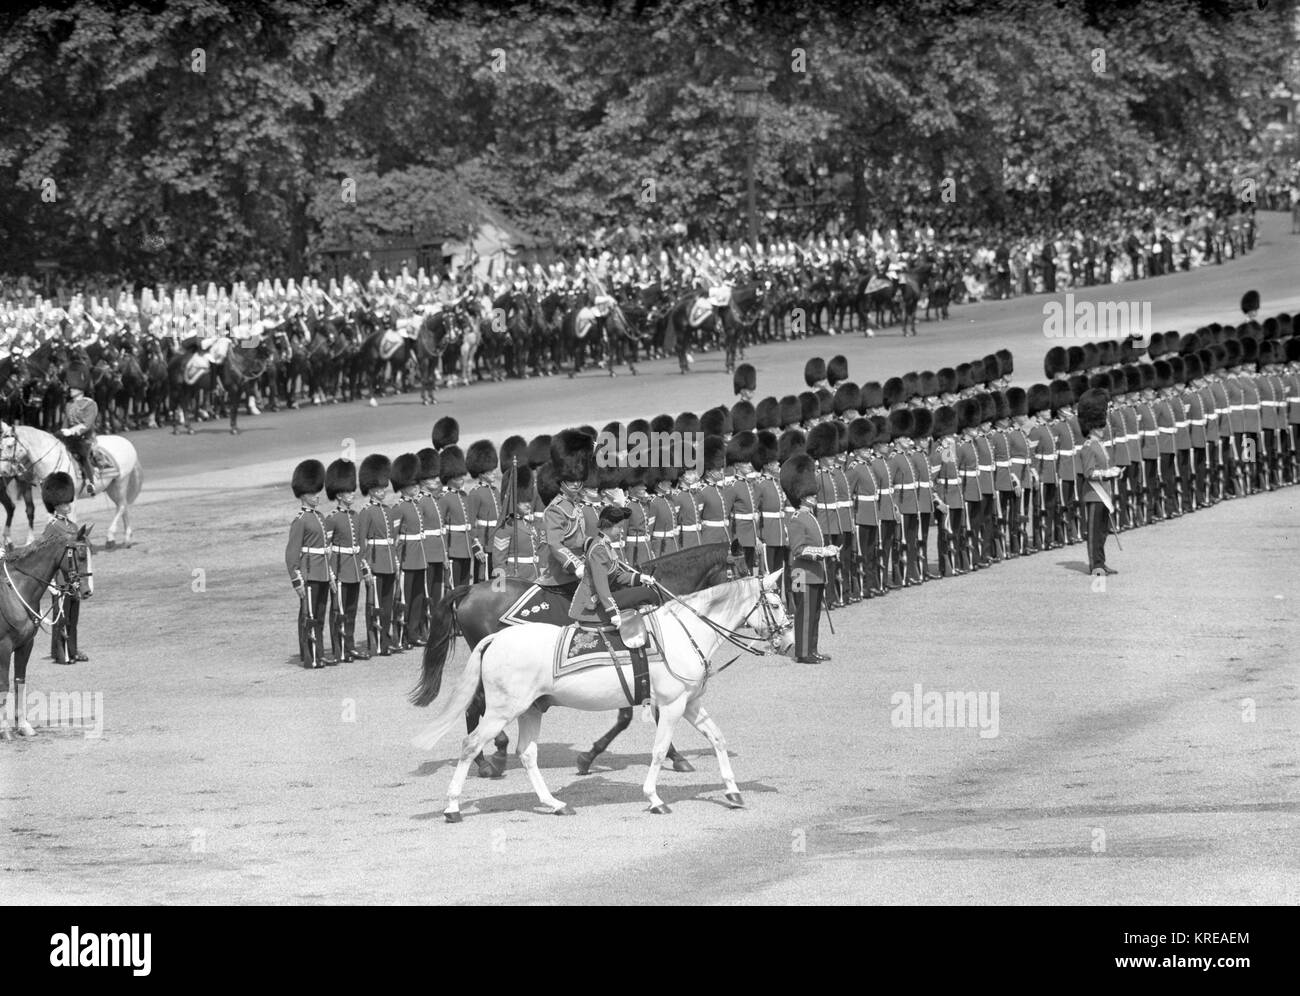 Queen Elizabeth II, mounted on a grey police horse named Doctor, is escorted by her husband, Prince Philip, Duke of Edinburgh, when she rides past the Guards at the Trooping the Colour ceremony on Horse Guards Parade, London. Stock Photo